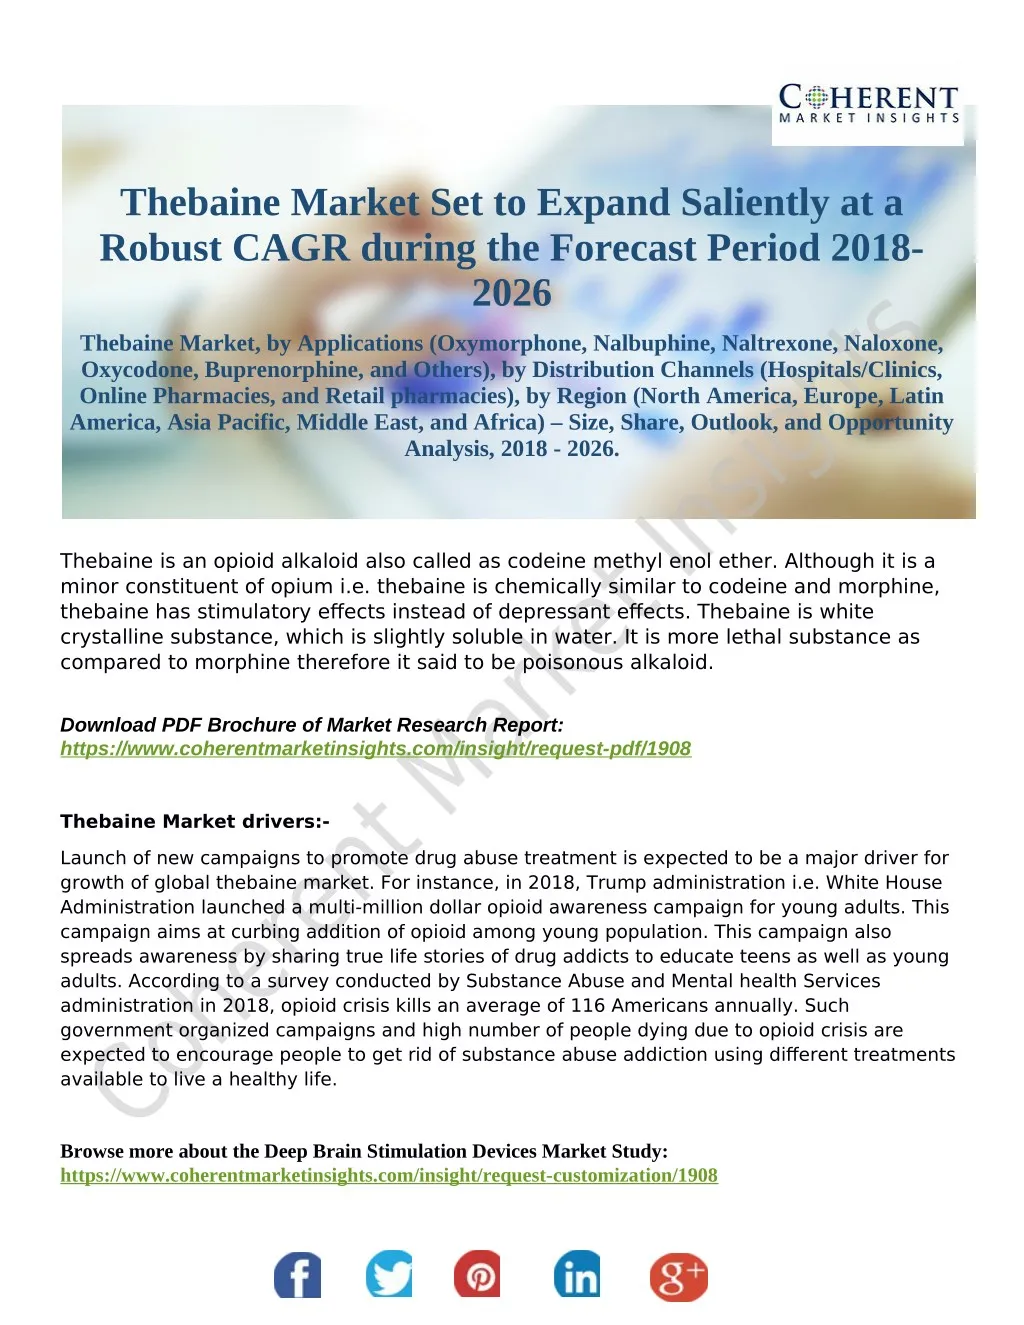 thebaine market set to expand saliently